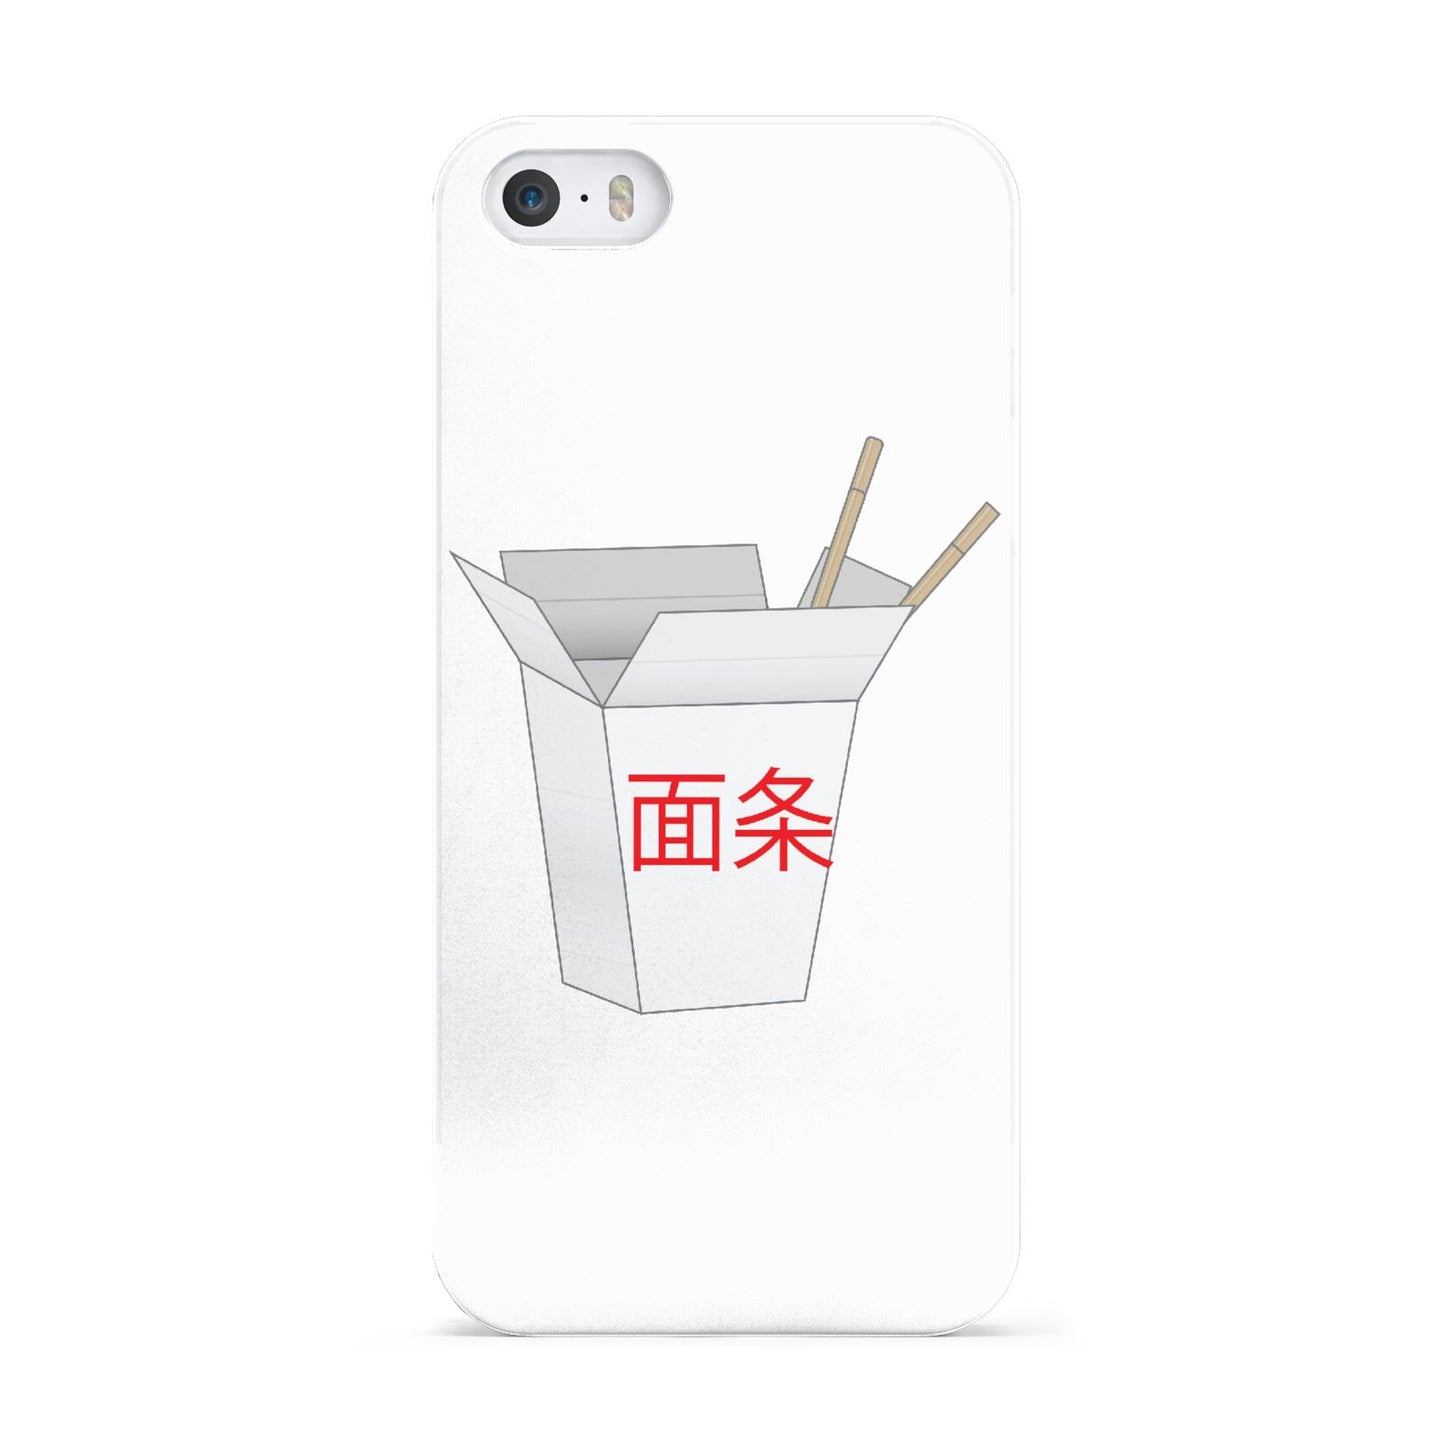 Chinese Takeaway Box Apple iPhone 5 Case